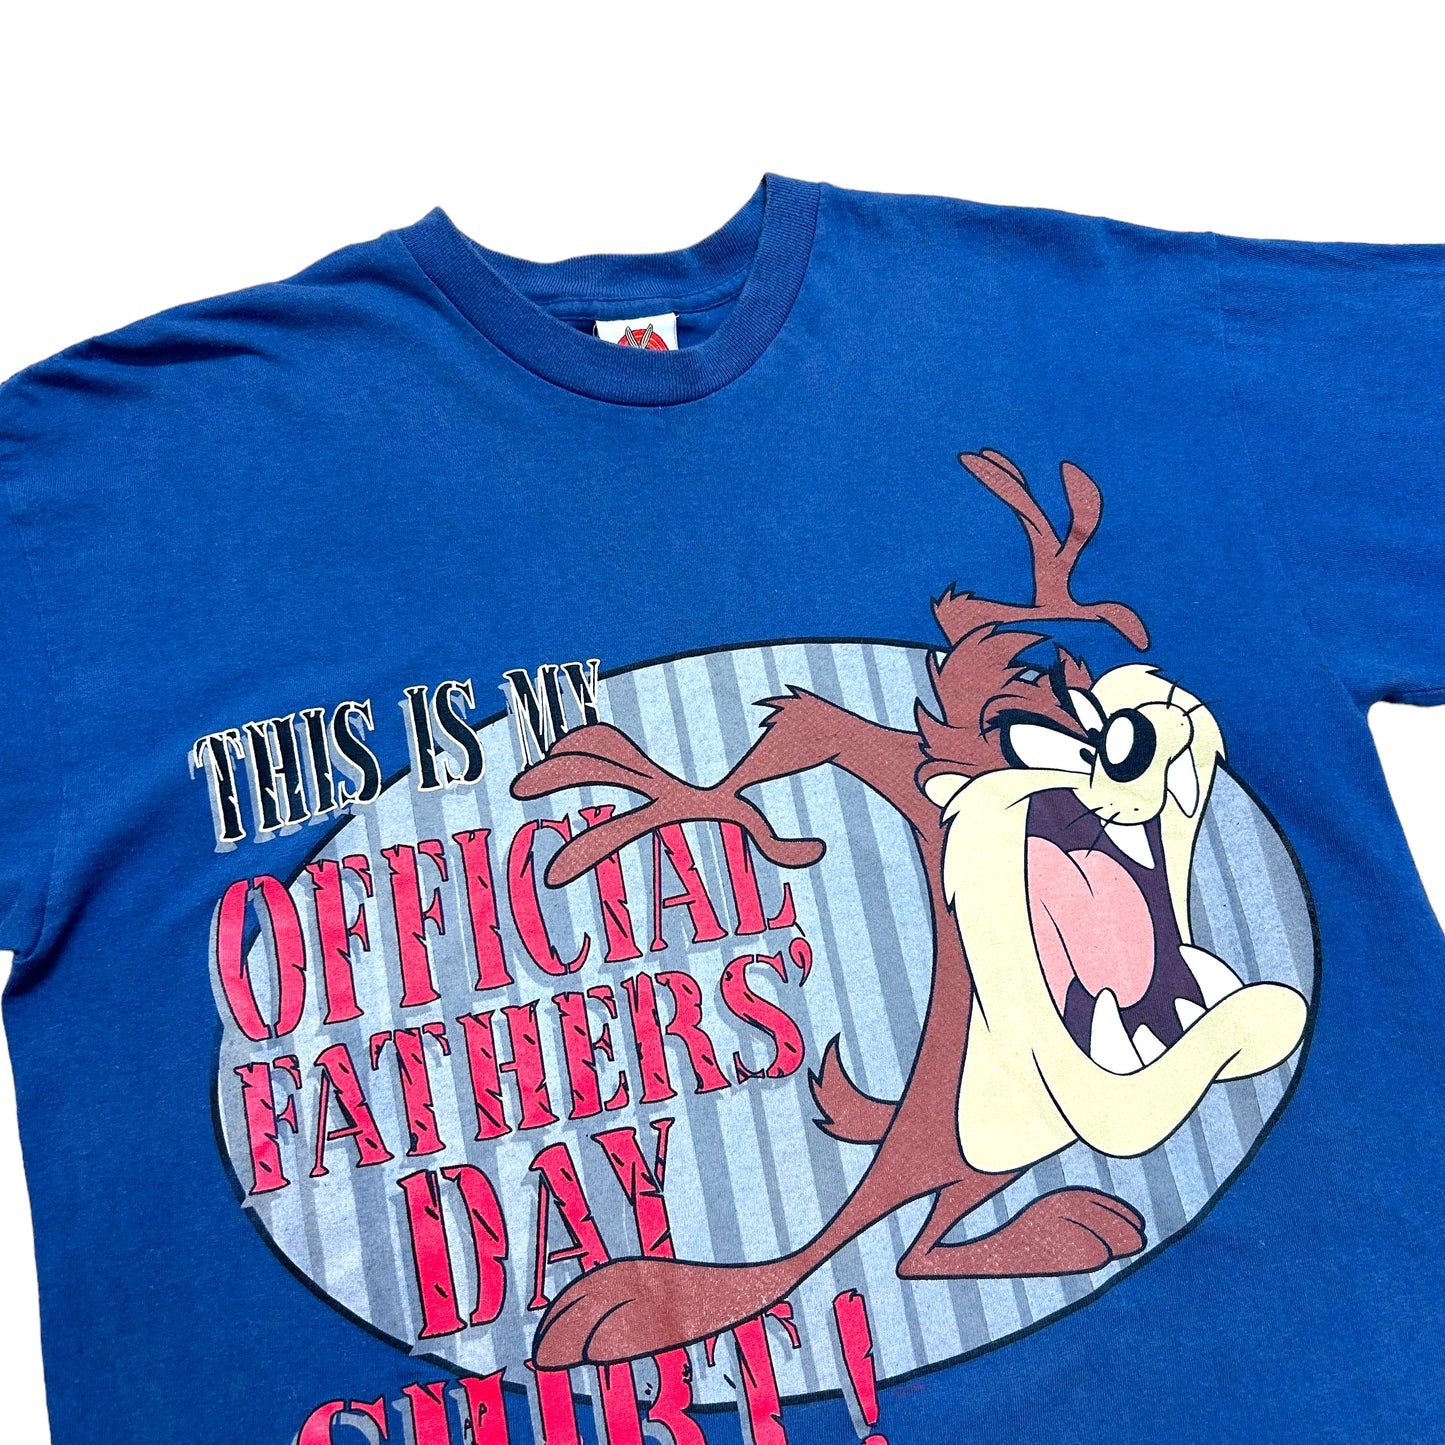 Vintage 1990s Taz “This Is My Official Fathers Day Shirt” Blue Graphic T-Shirt - Size Large